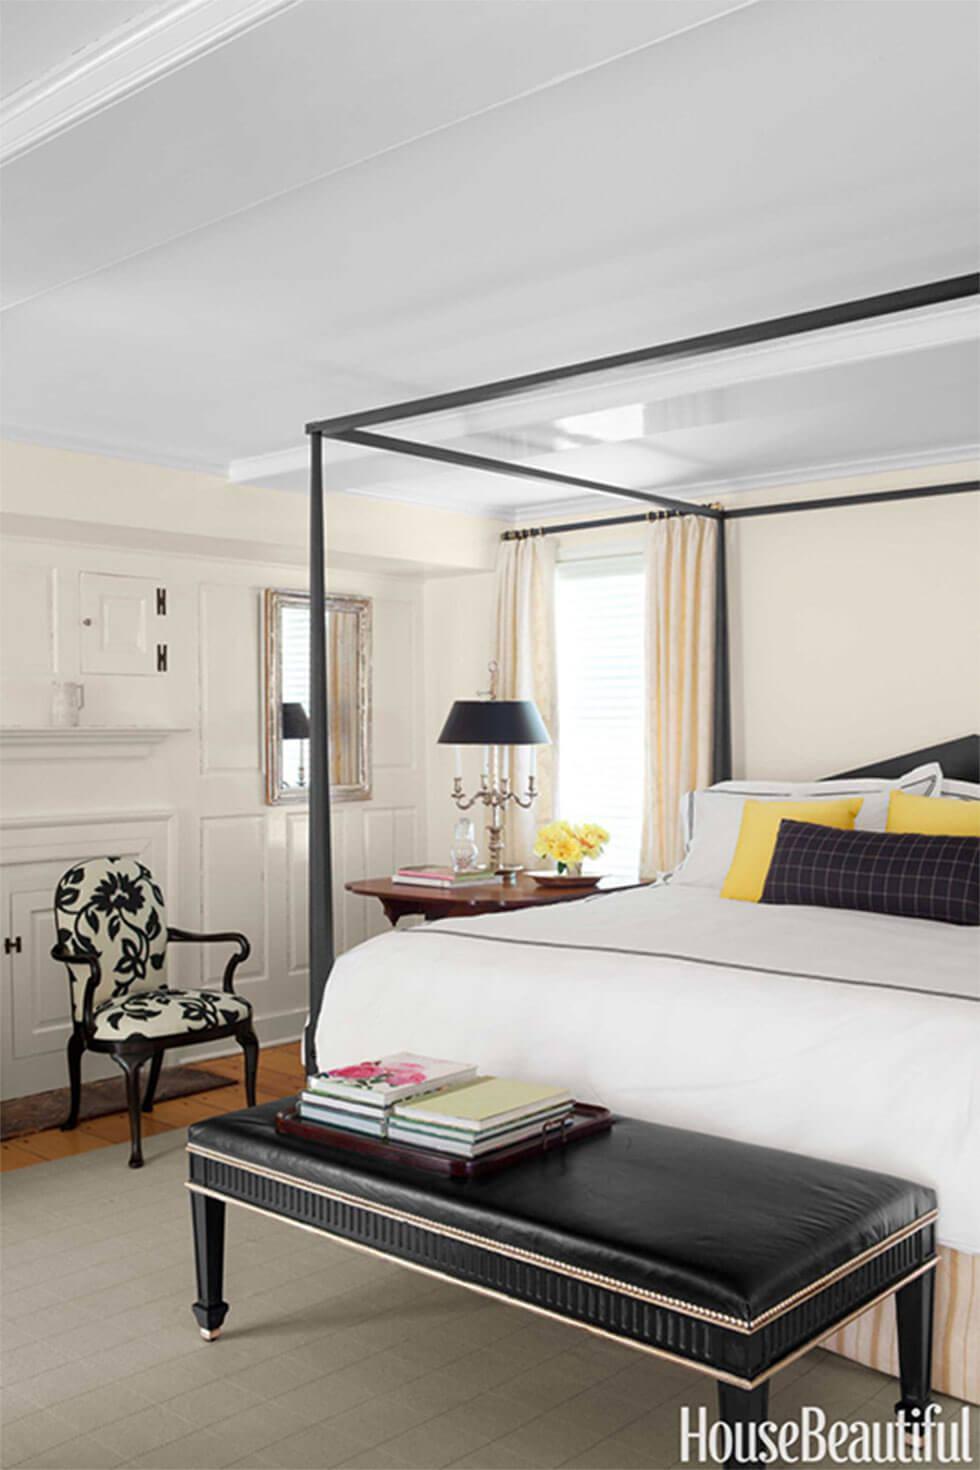 Classic black and white bedroom with floral armchair, four poster bed and bright yellow cushions